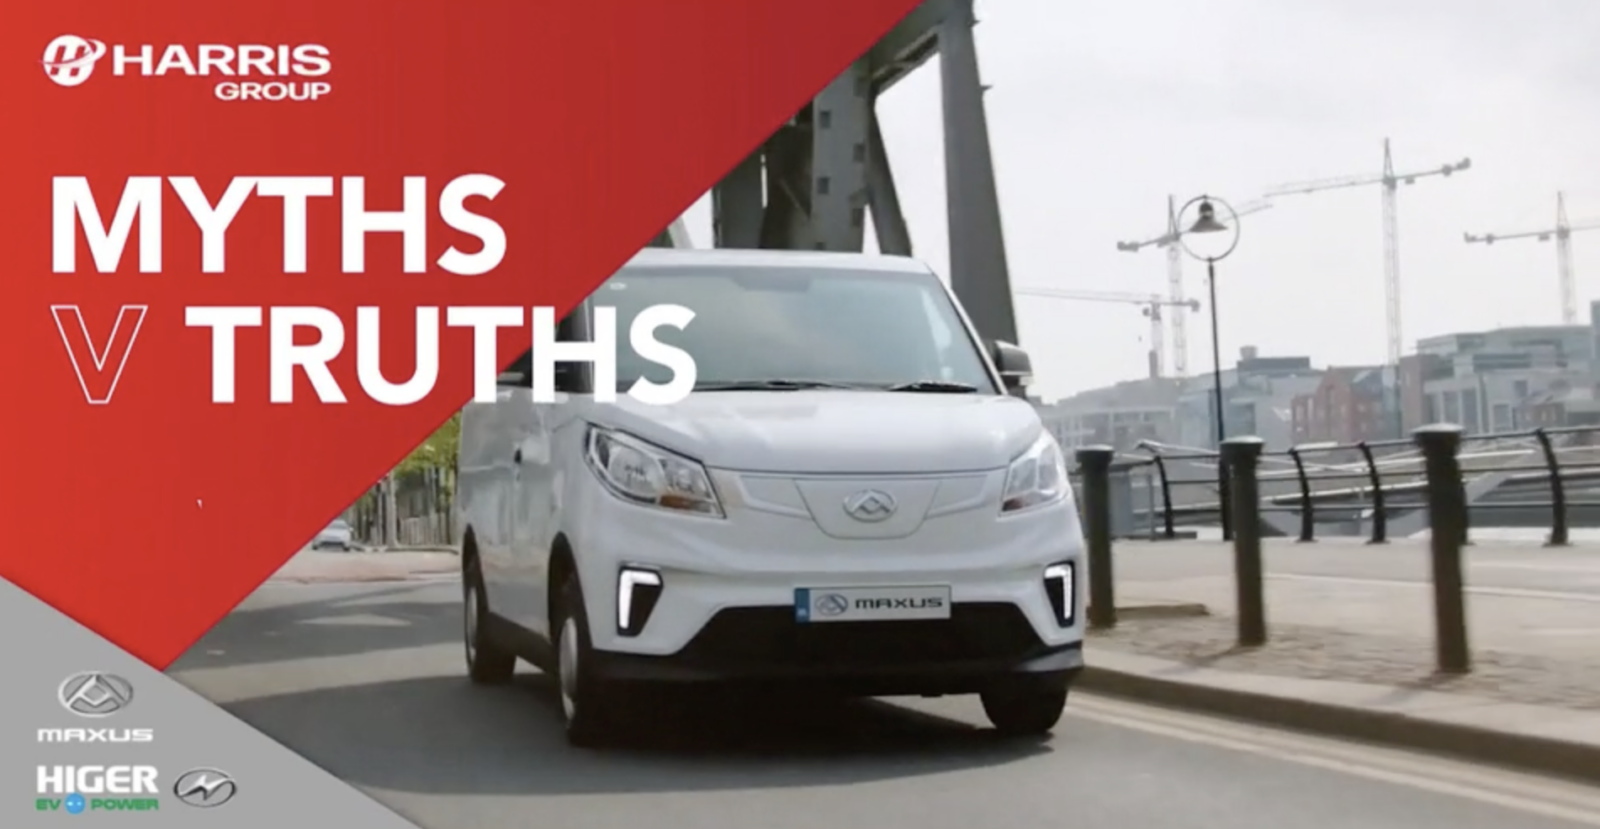 Harris Group electric vehicle myths vs. truths series